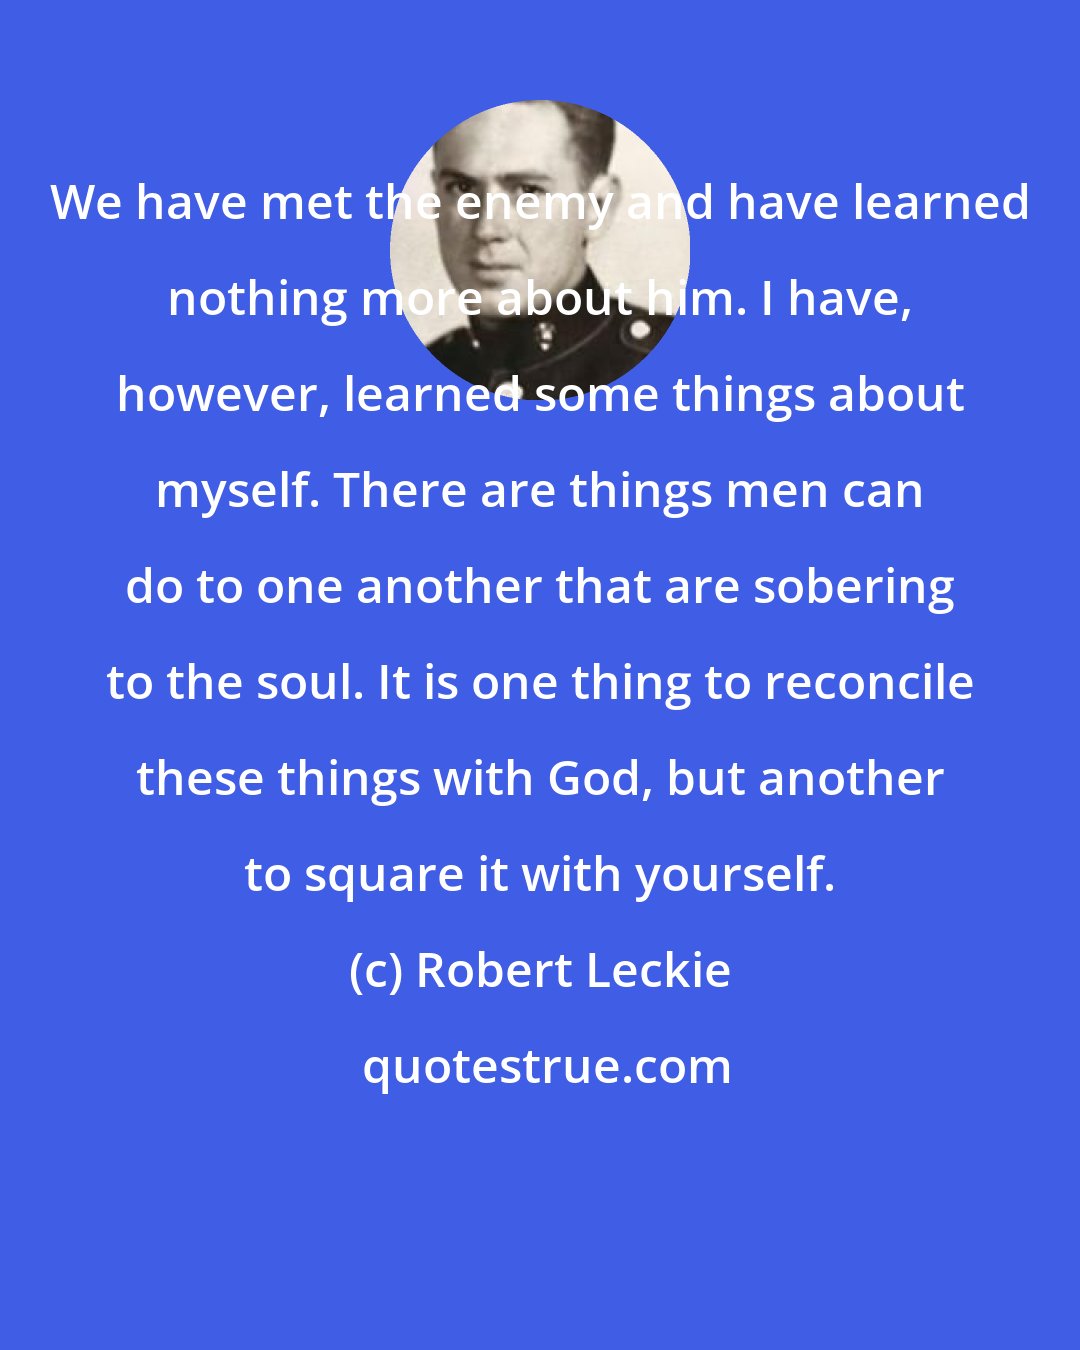 Robert Leckie: We have met the enemy and have learned nothing more about him. I have, however, learned some things about myself. There are things men can do to one another that are sobering to the soul. It is one thing to reconcile these things with God, but another to square it with yourself.